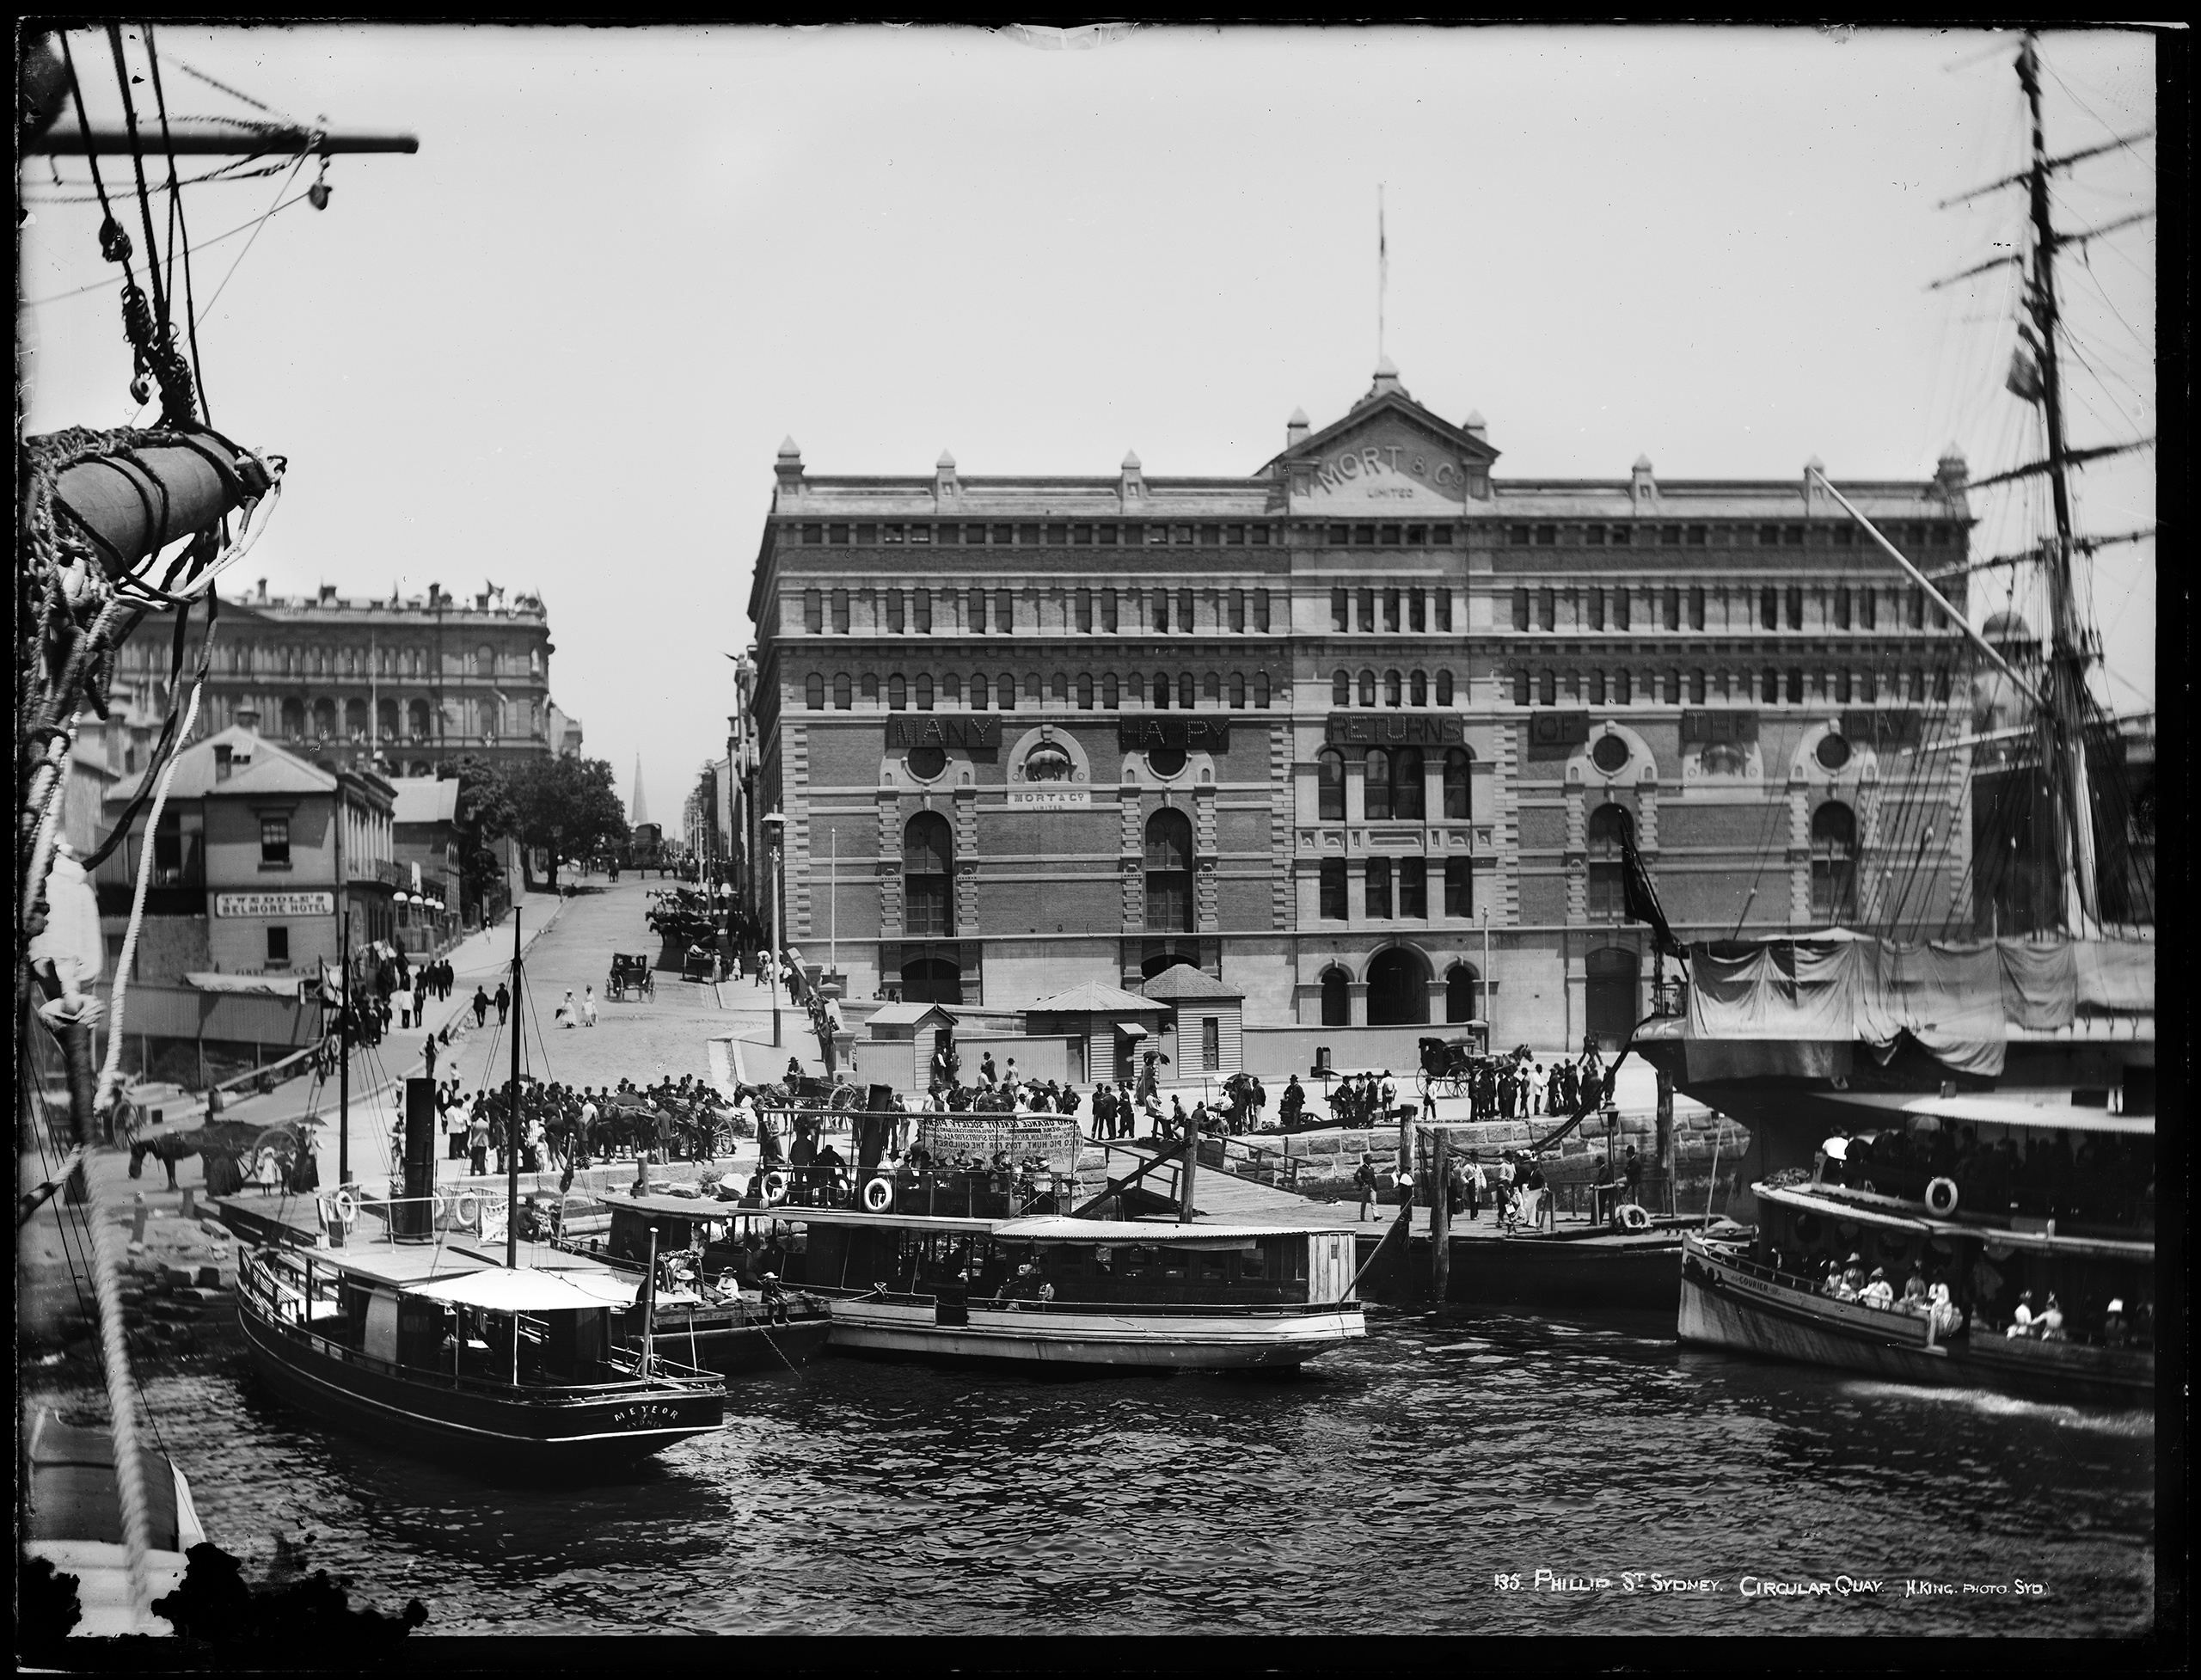 Glass plate negative of Mort & Co. wool store, Circular Quay, Sydney, 1887-1889